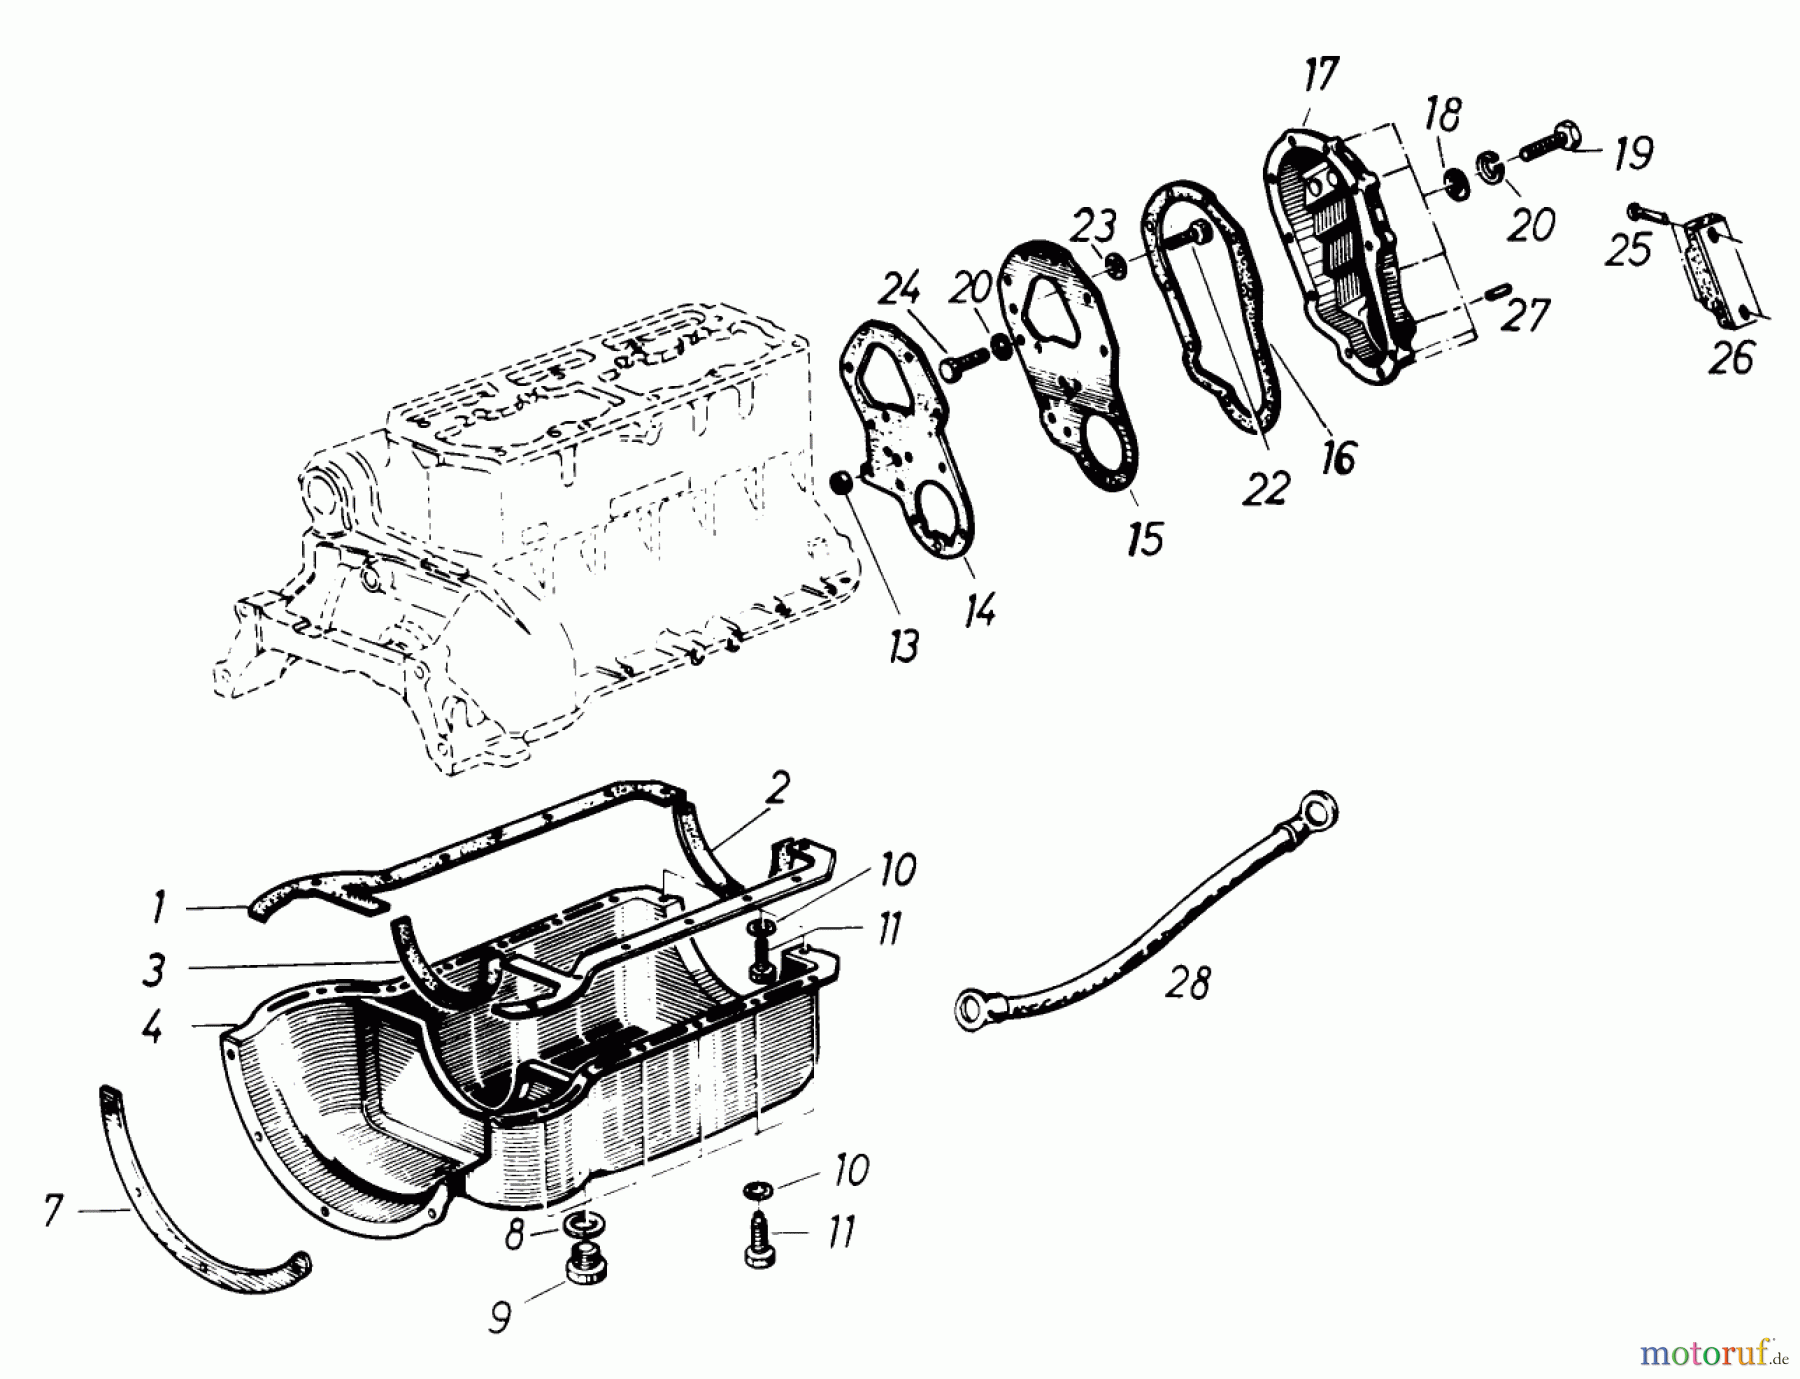  Toro Neu Mowers, Lawn & Garden Tractor Seite 1 61-20RG01 (D-250) - Toro D-250 10-Speed Tractor, 1977 OIL SUMP AND TIMING CHAIN COVER